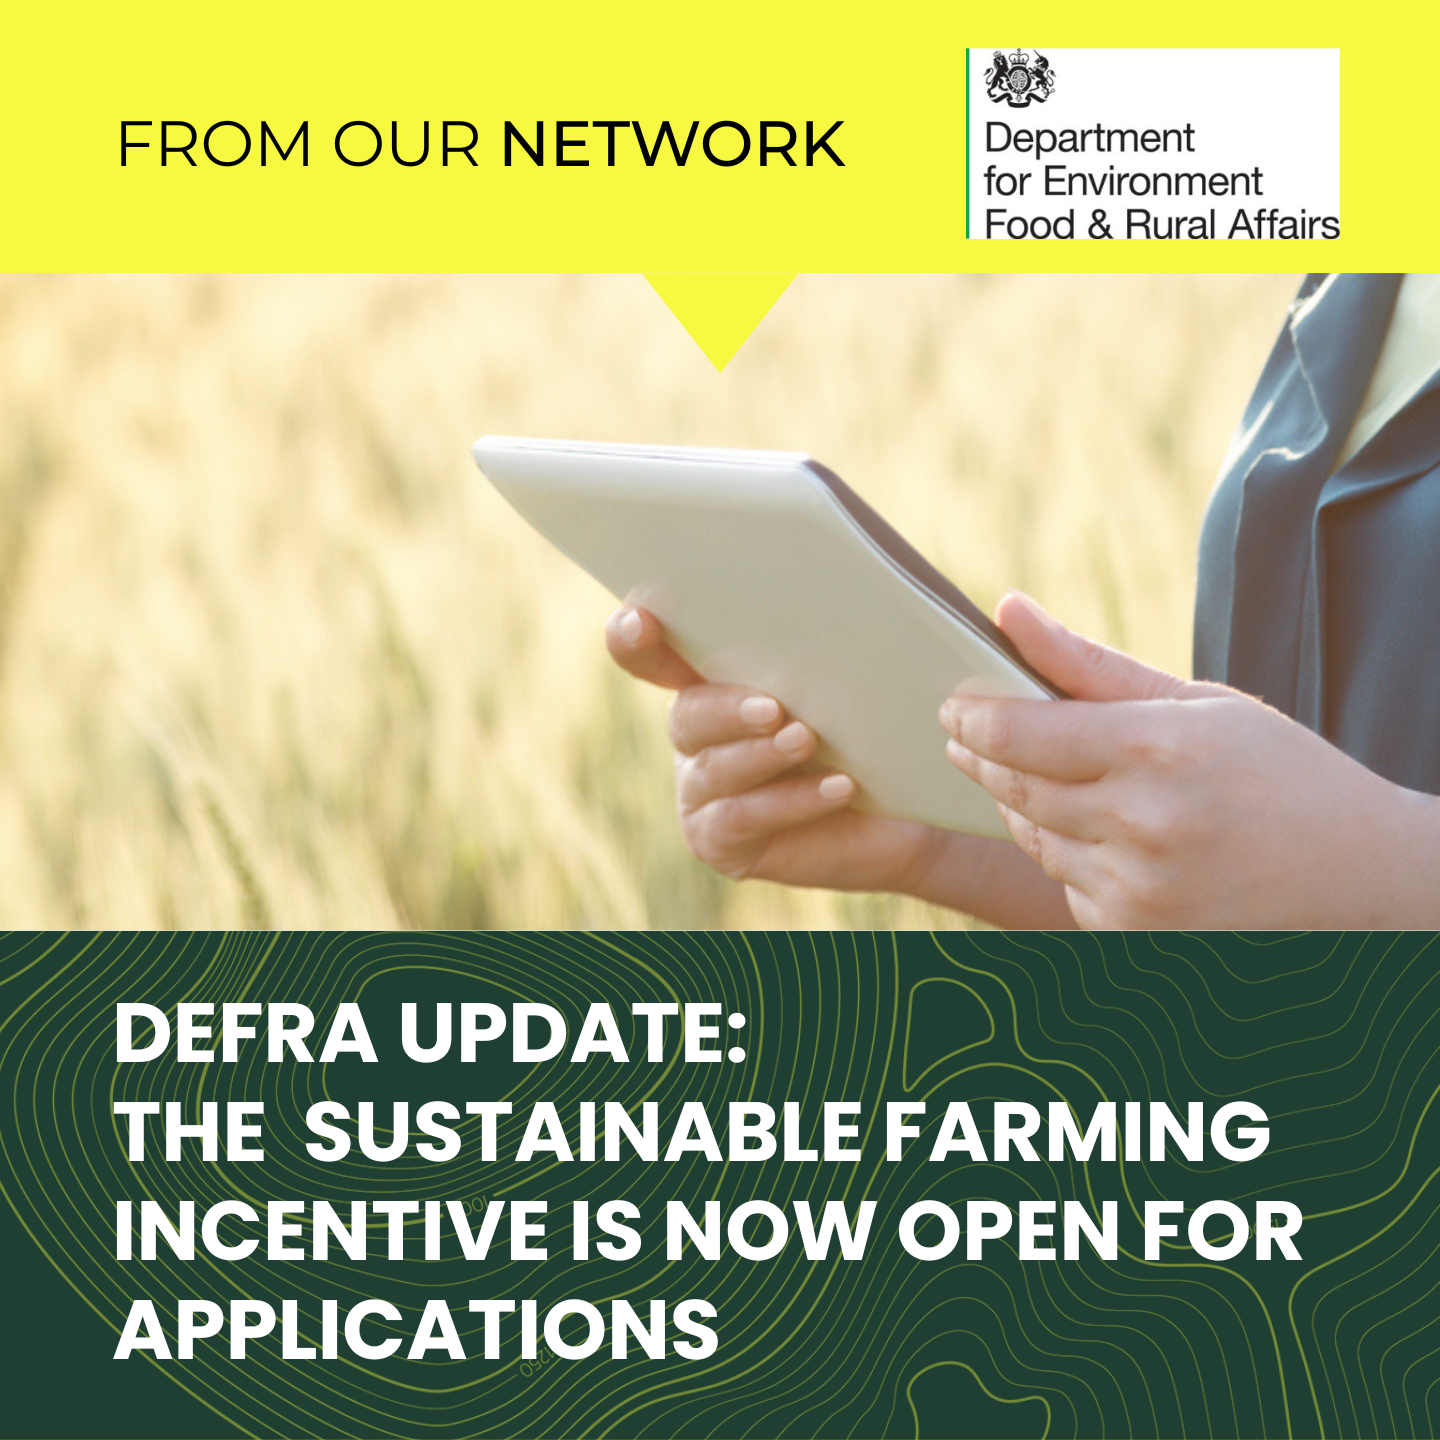 Sustainable Farming Incentive Now Open for Applications